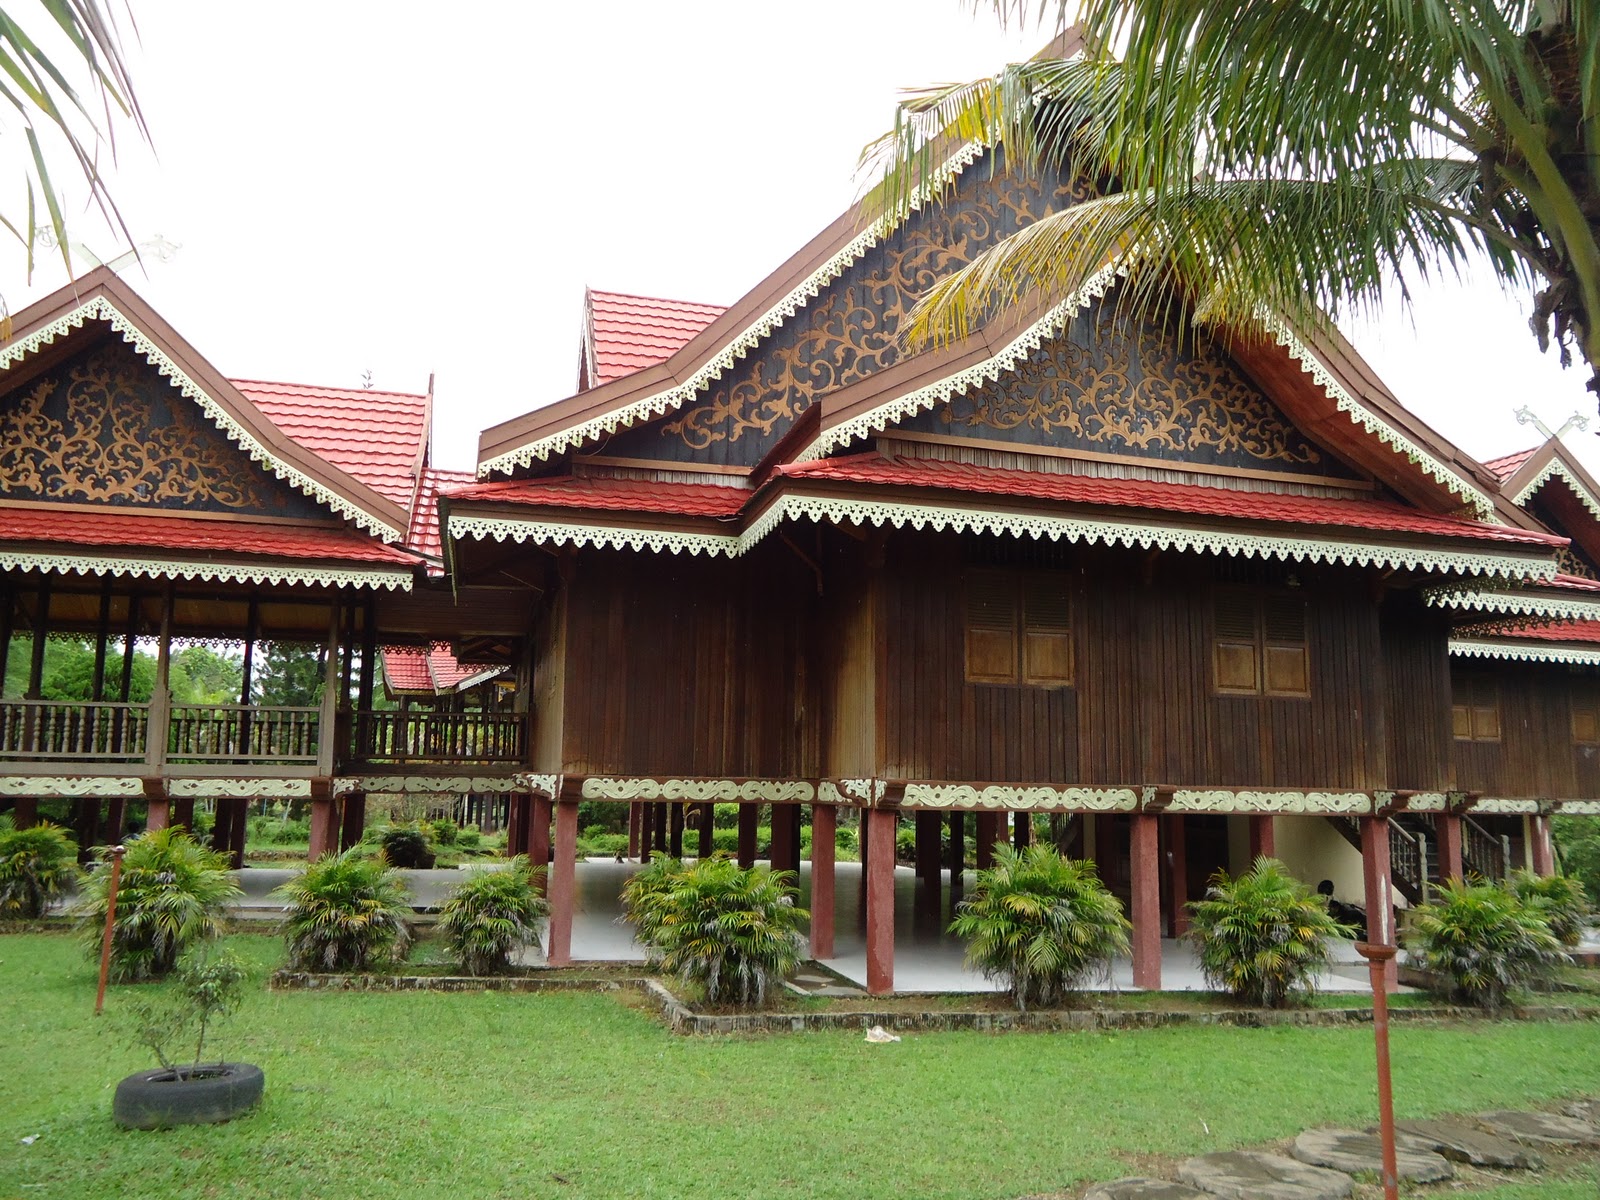 Jambi house Thai house, Traditional house, Architecture old